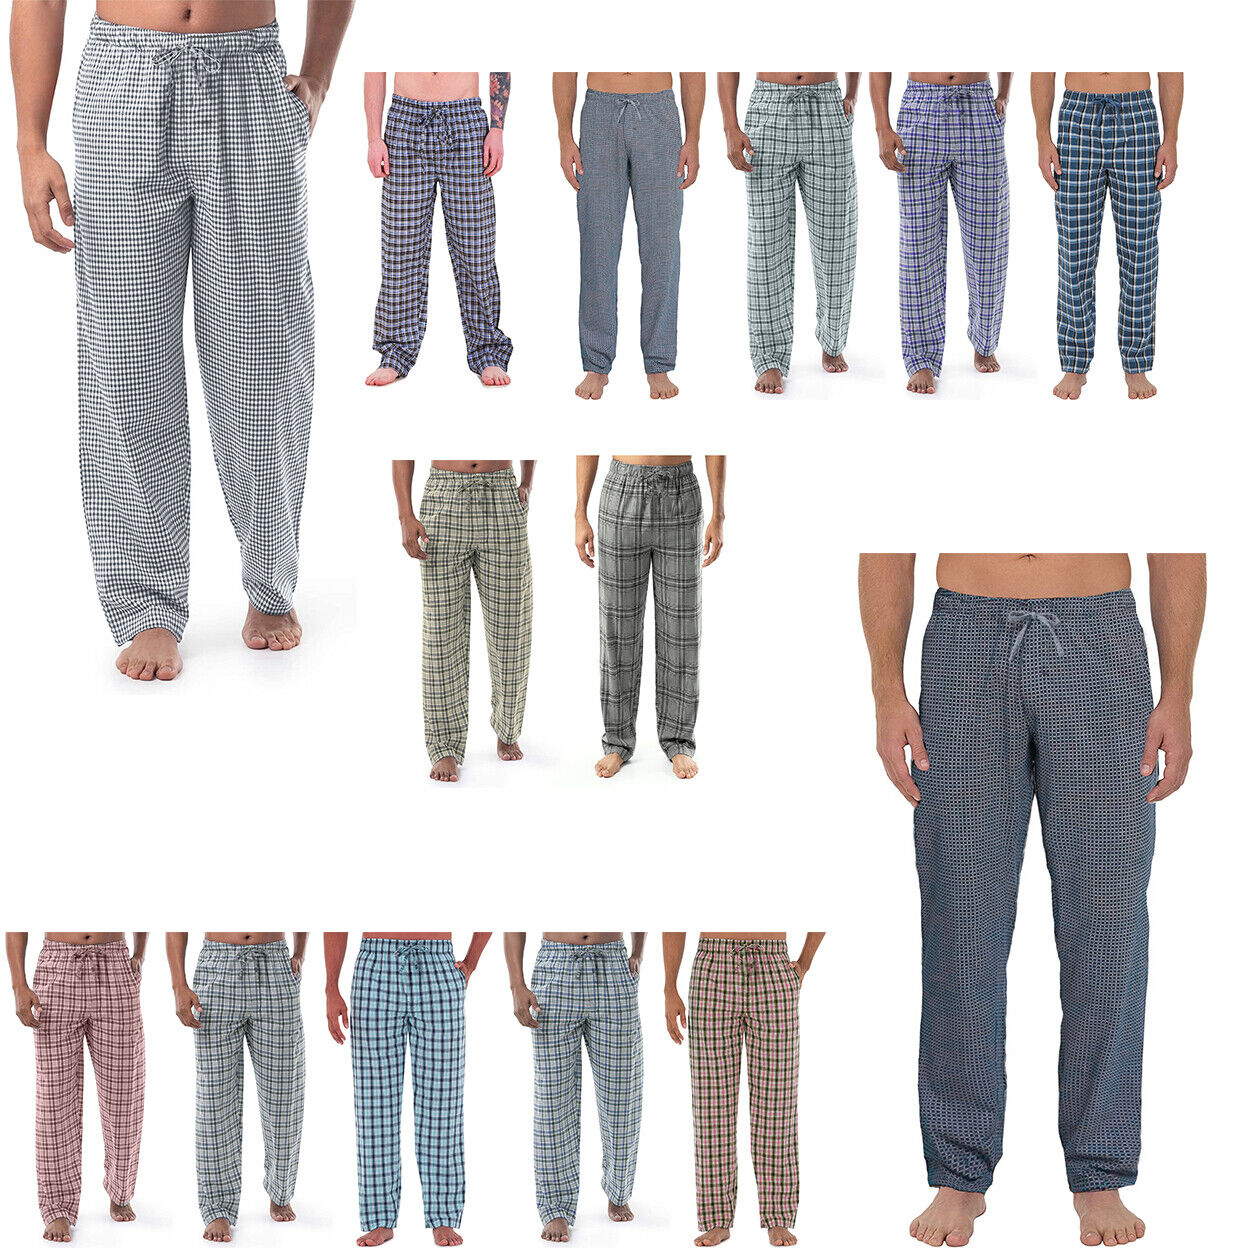 3-Pack: Men's Ultra-Soft Solid & Plaid Cotton Jersey Knit Comfy Sleep Lounge Pajama Pants - Solid, Medium